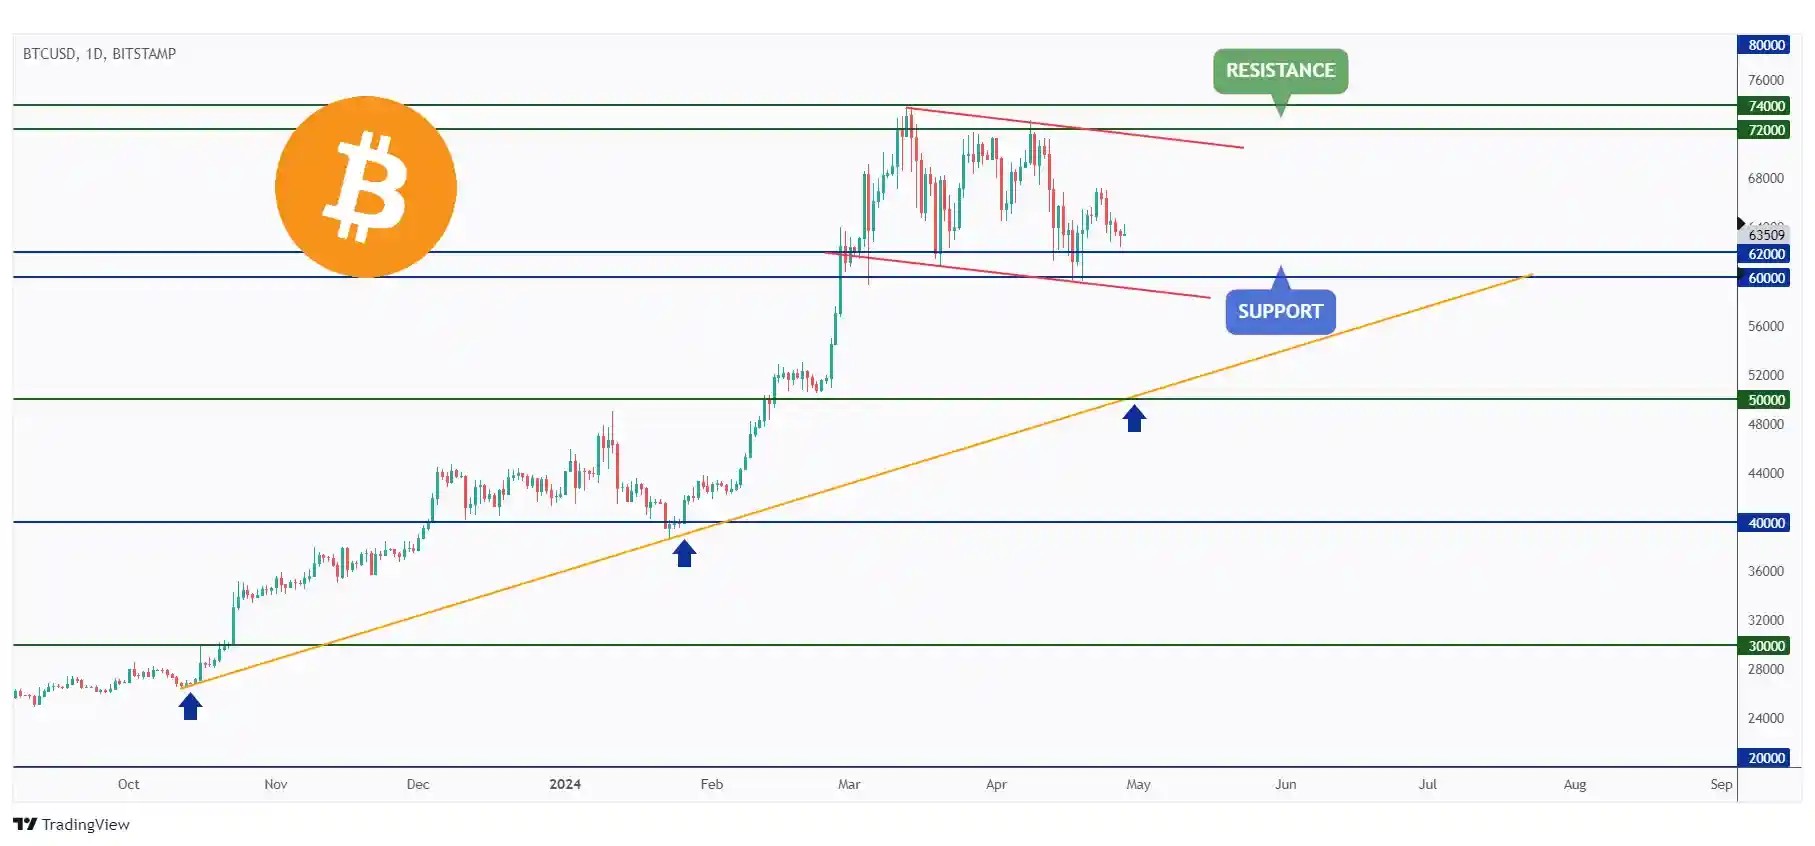 BTC daily chart hovering around a strong support zone $60,000 - $62,000.